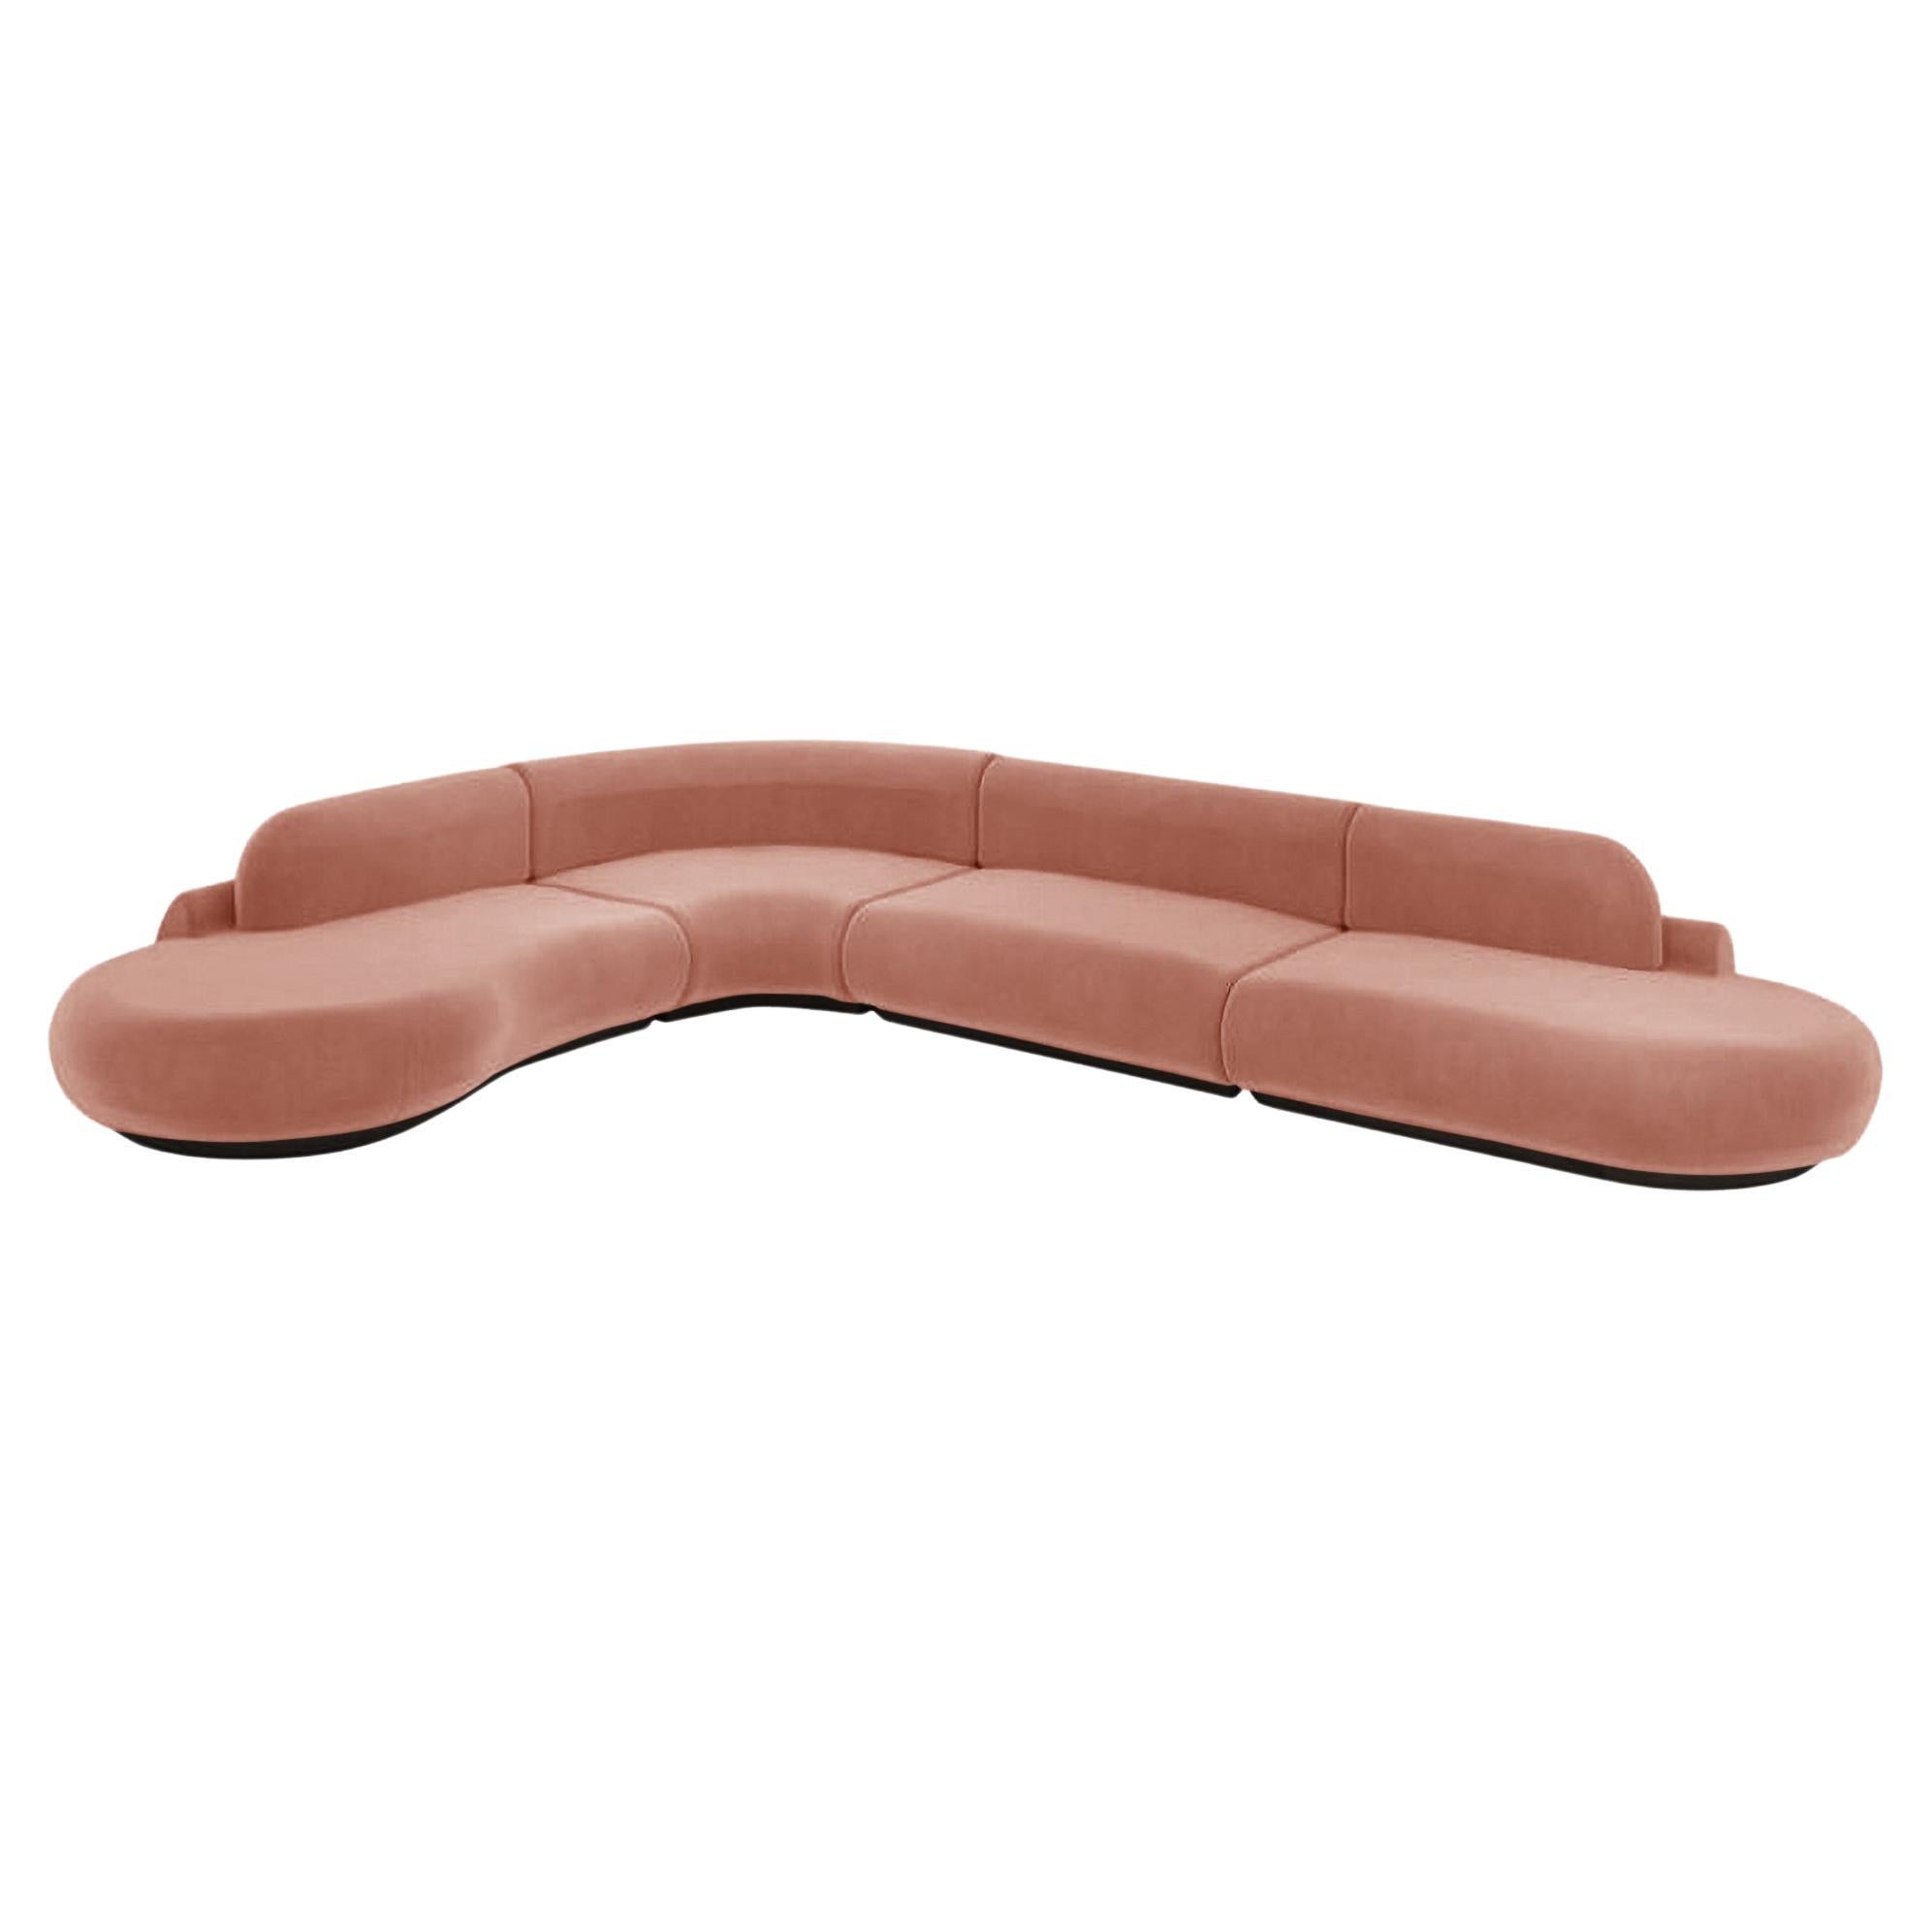 Naked Curved Sectional Sofa, 4 Piece with Beech Ash-056-5 and Paris Brick For Sale